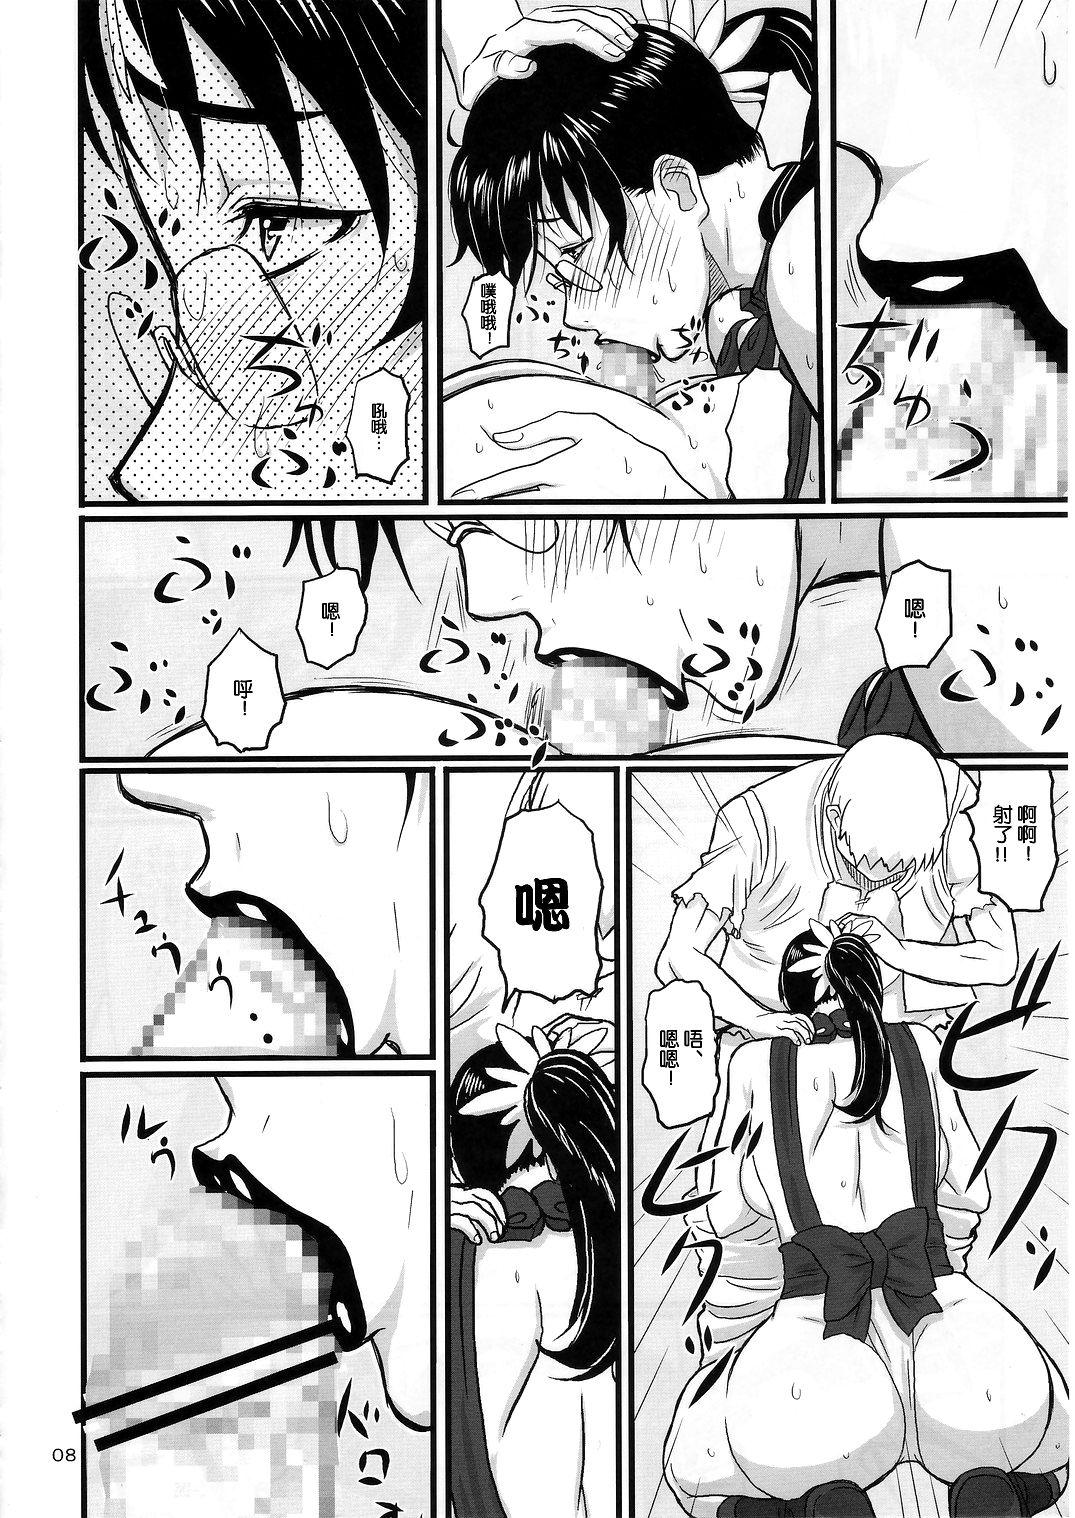 Africa Package Meat - Queens blade Lez - Page 8